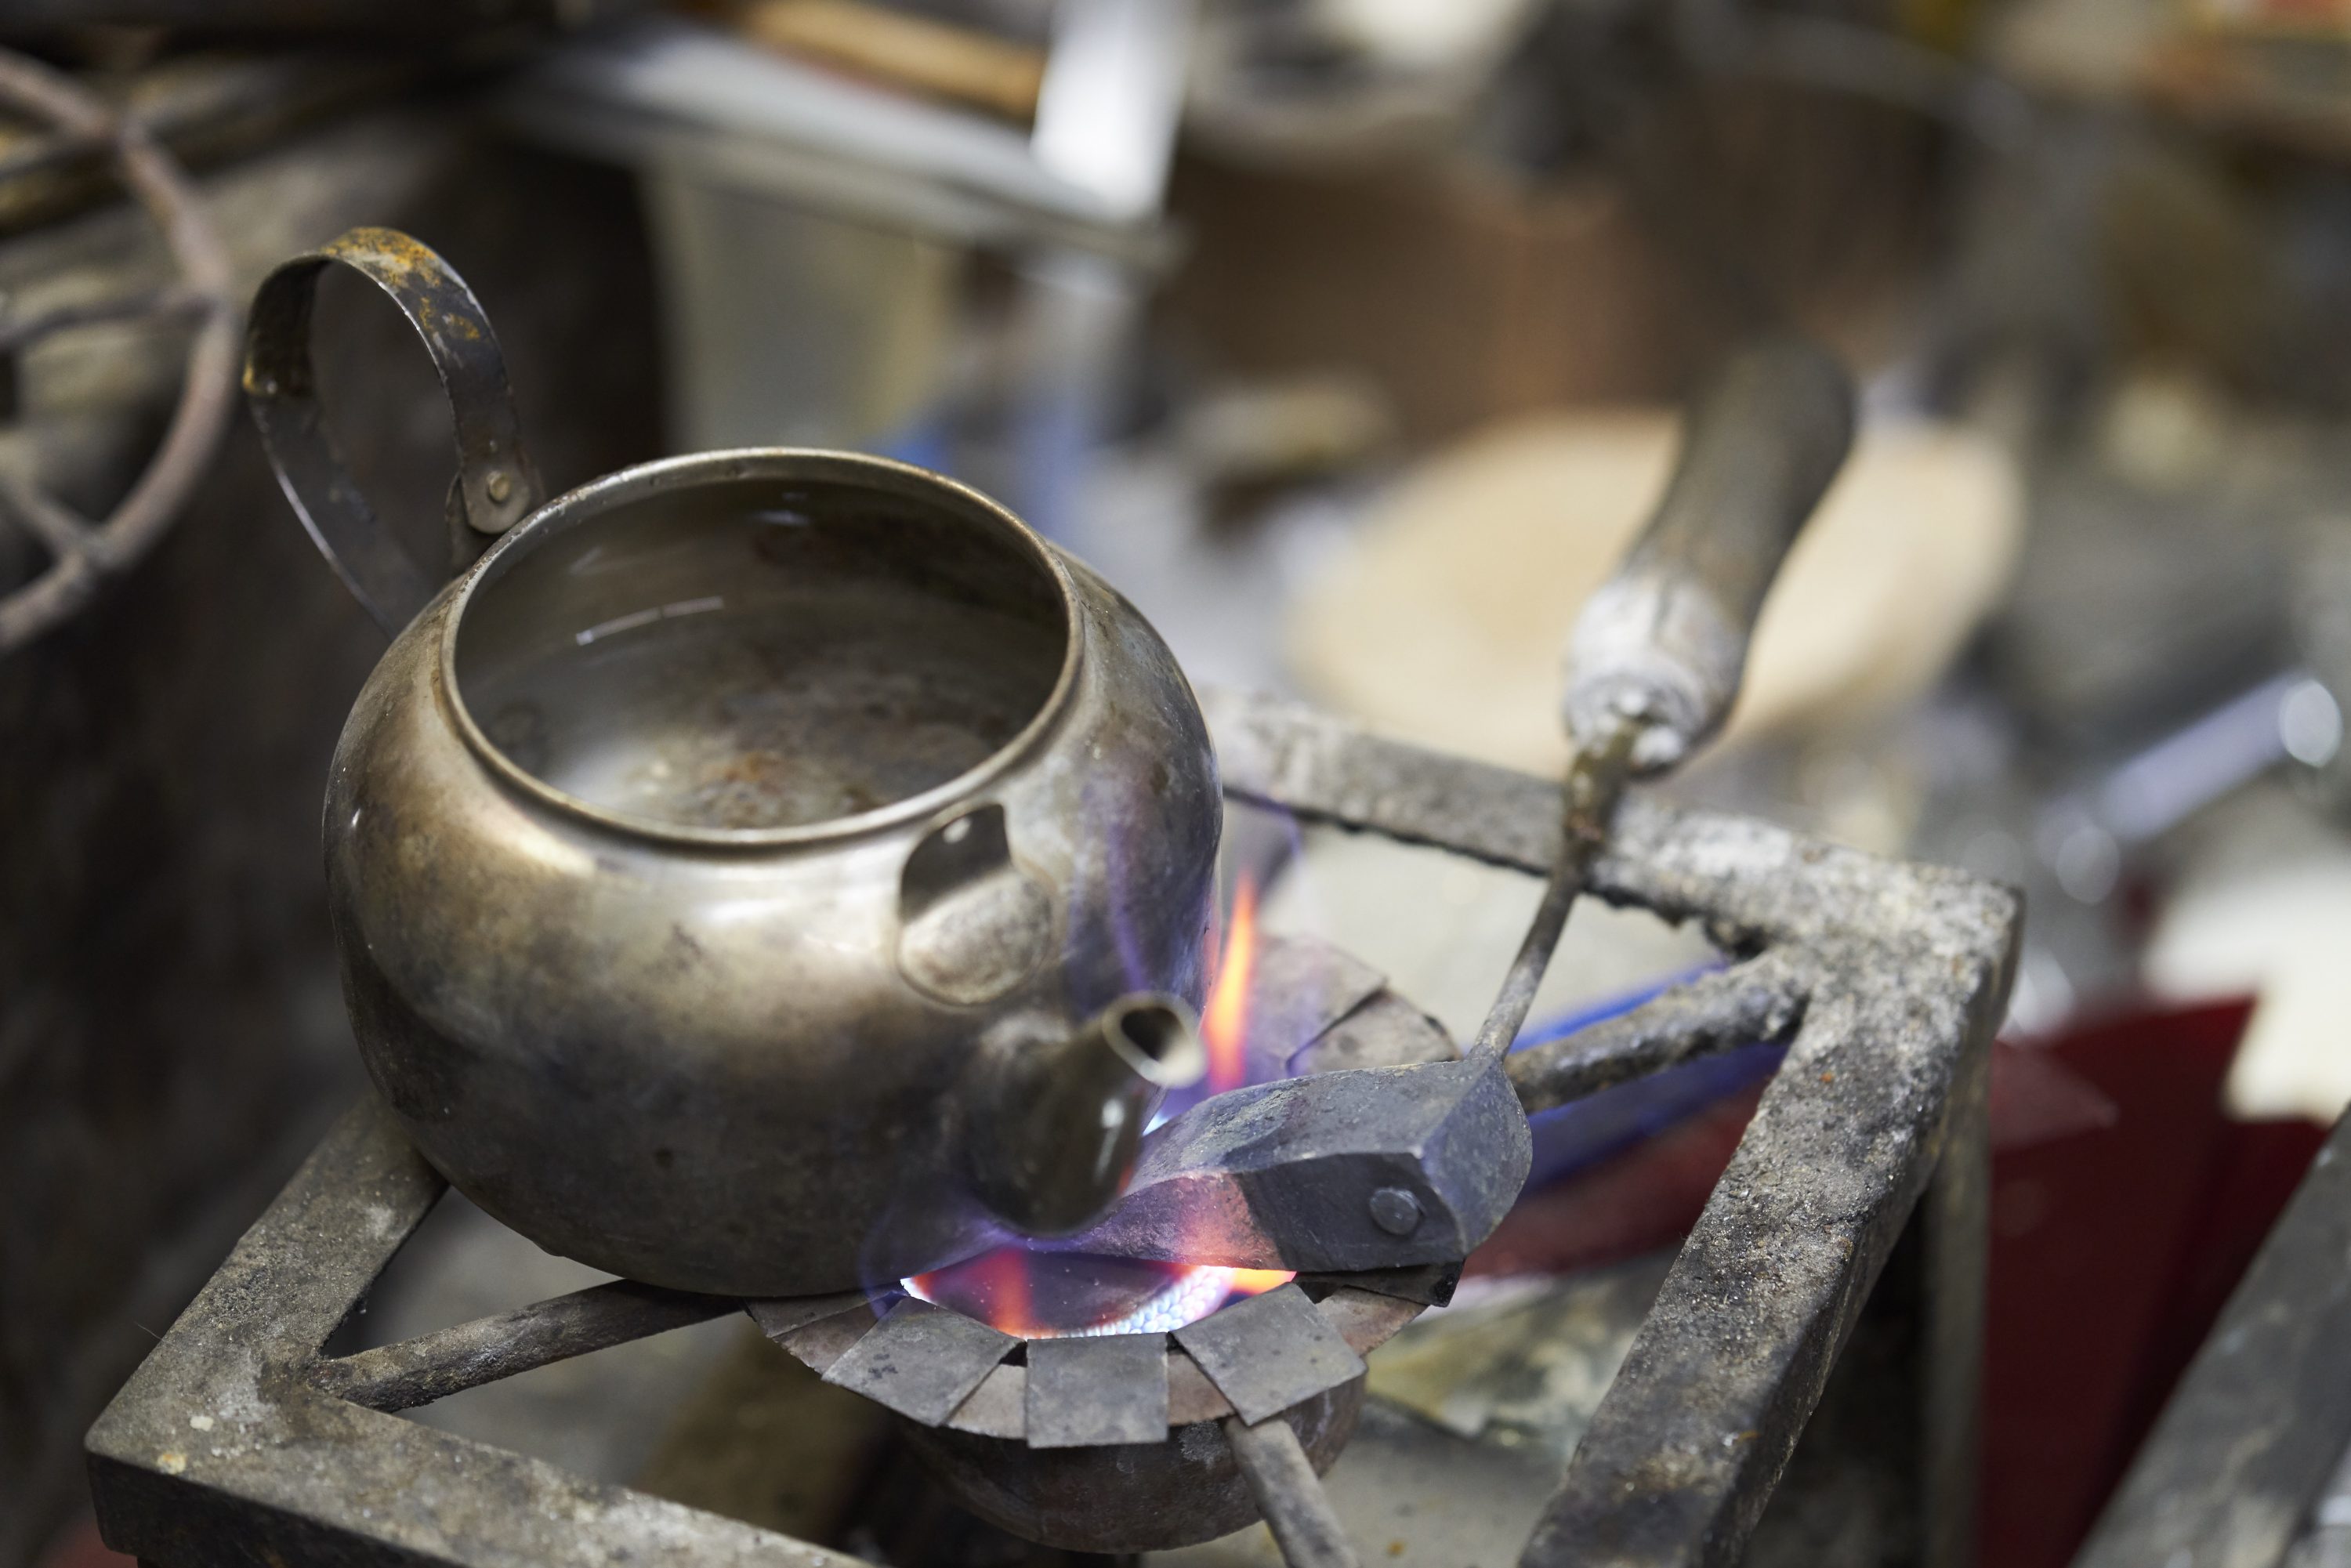 An artist heats his soldering tool and water for tea at the workshop of Atef Salama